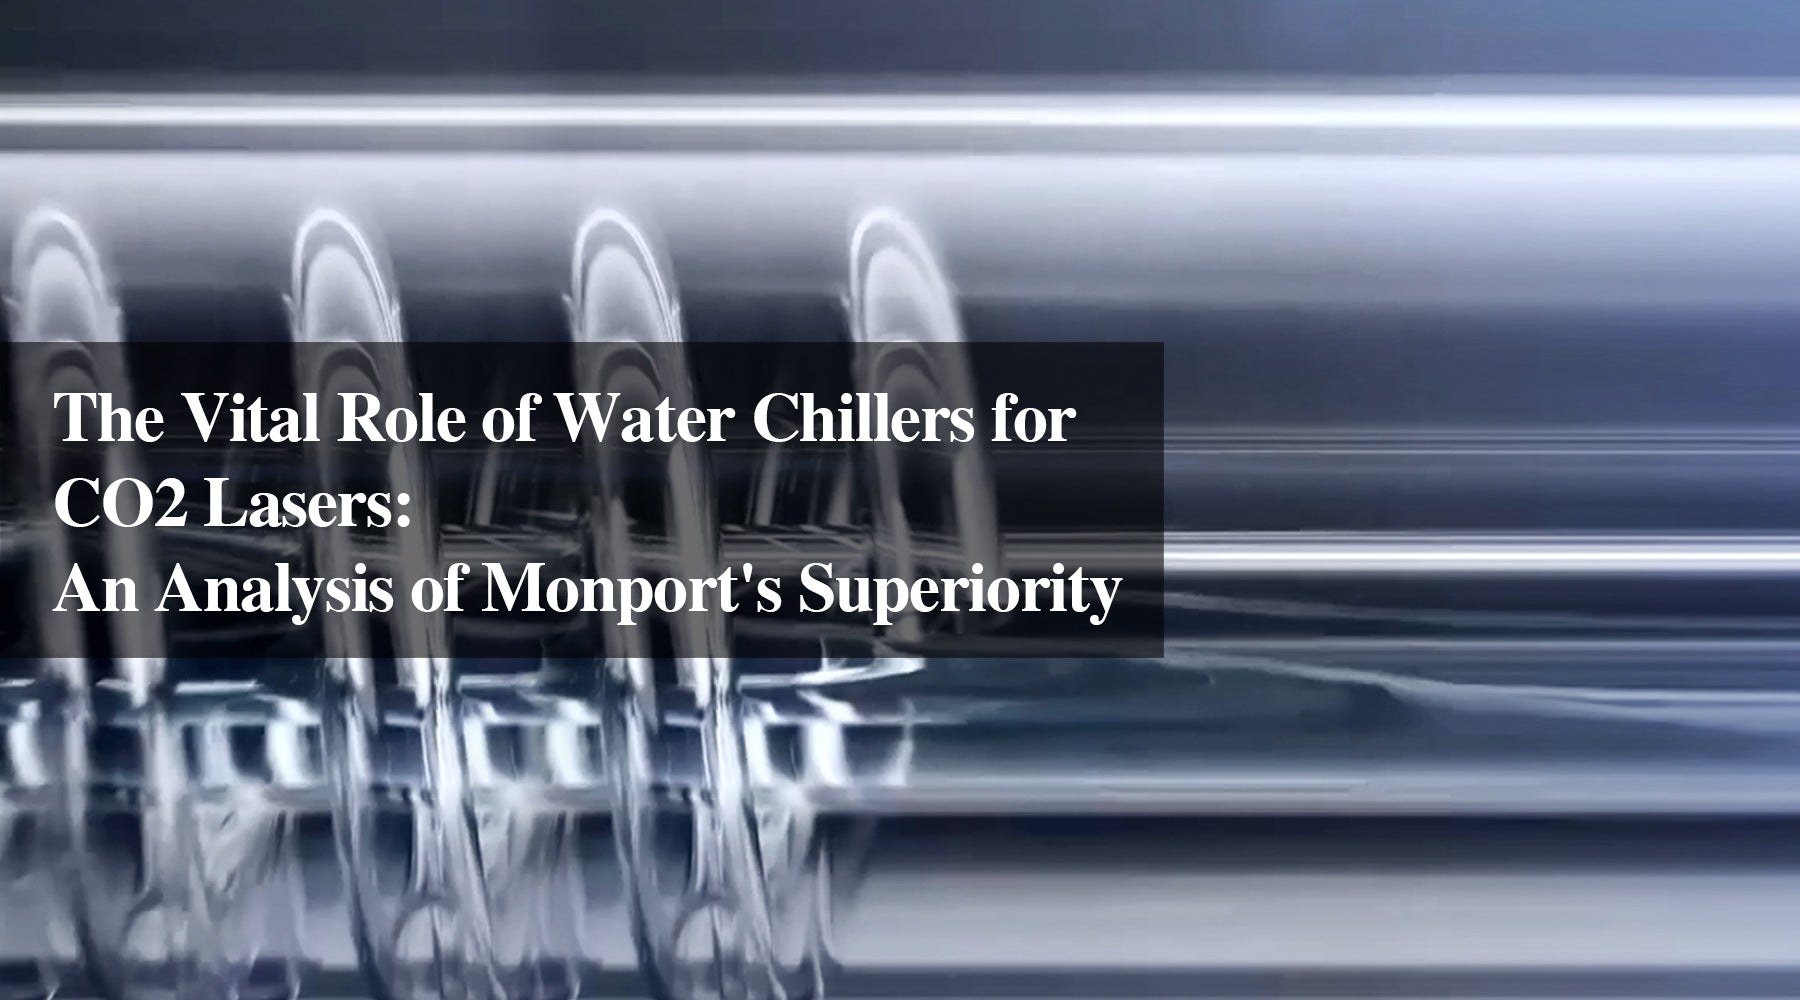 The Vital Role of Water Chillers for CO2 Lasers: An Analysis of Monport's Superiority